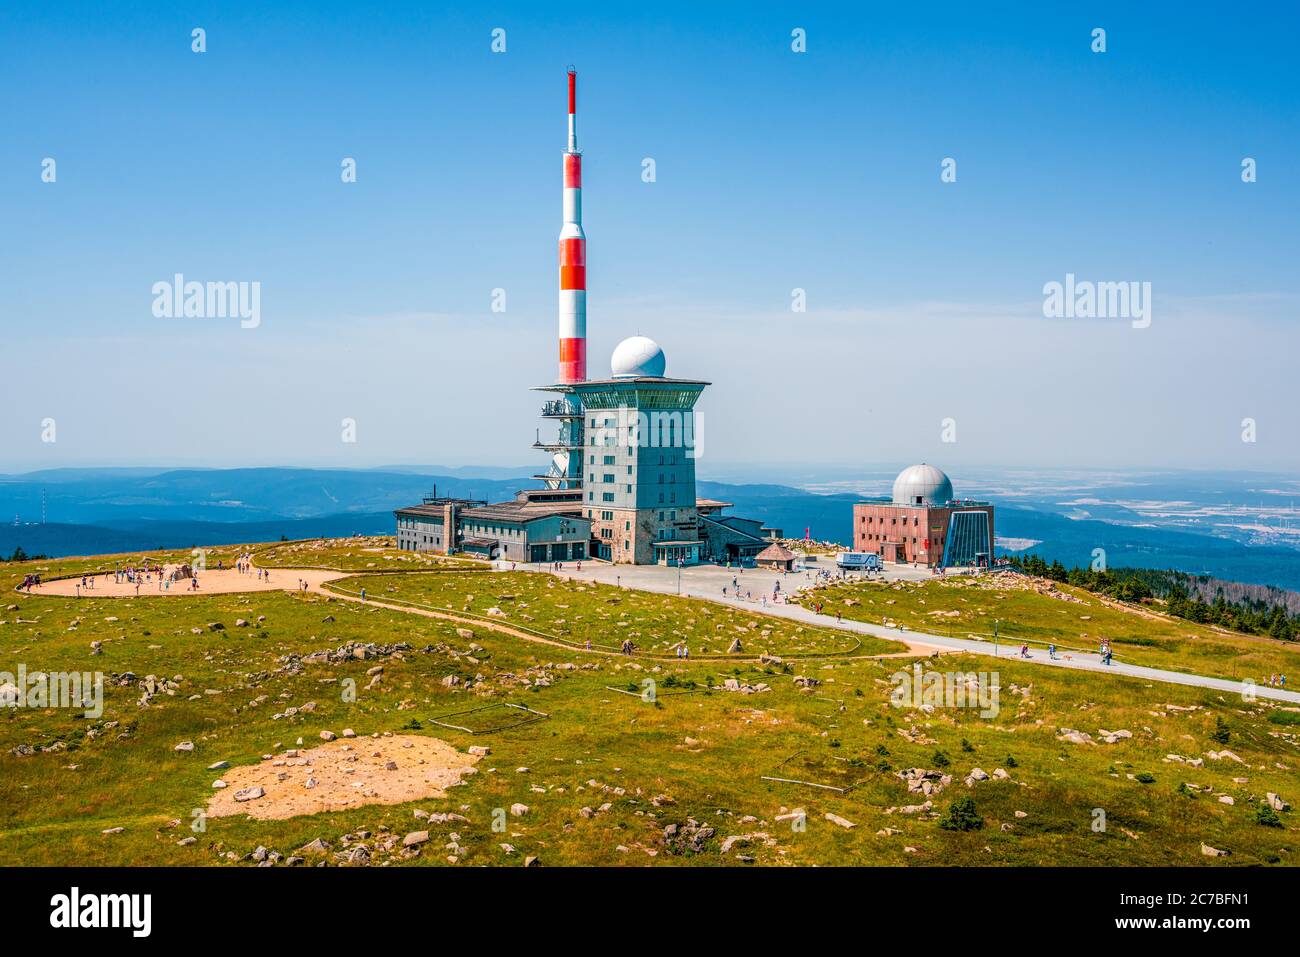 The Mountain 'Brocken' in Harz National Park, Germany Stock Photo